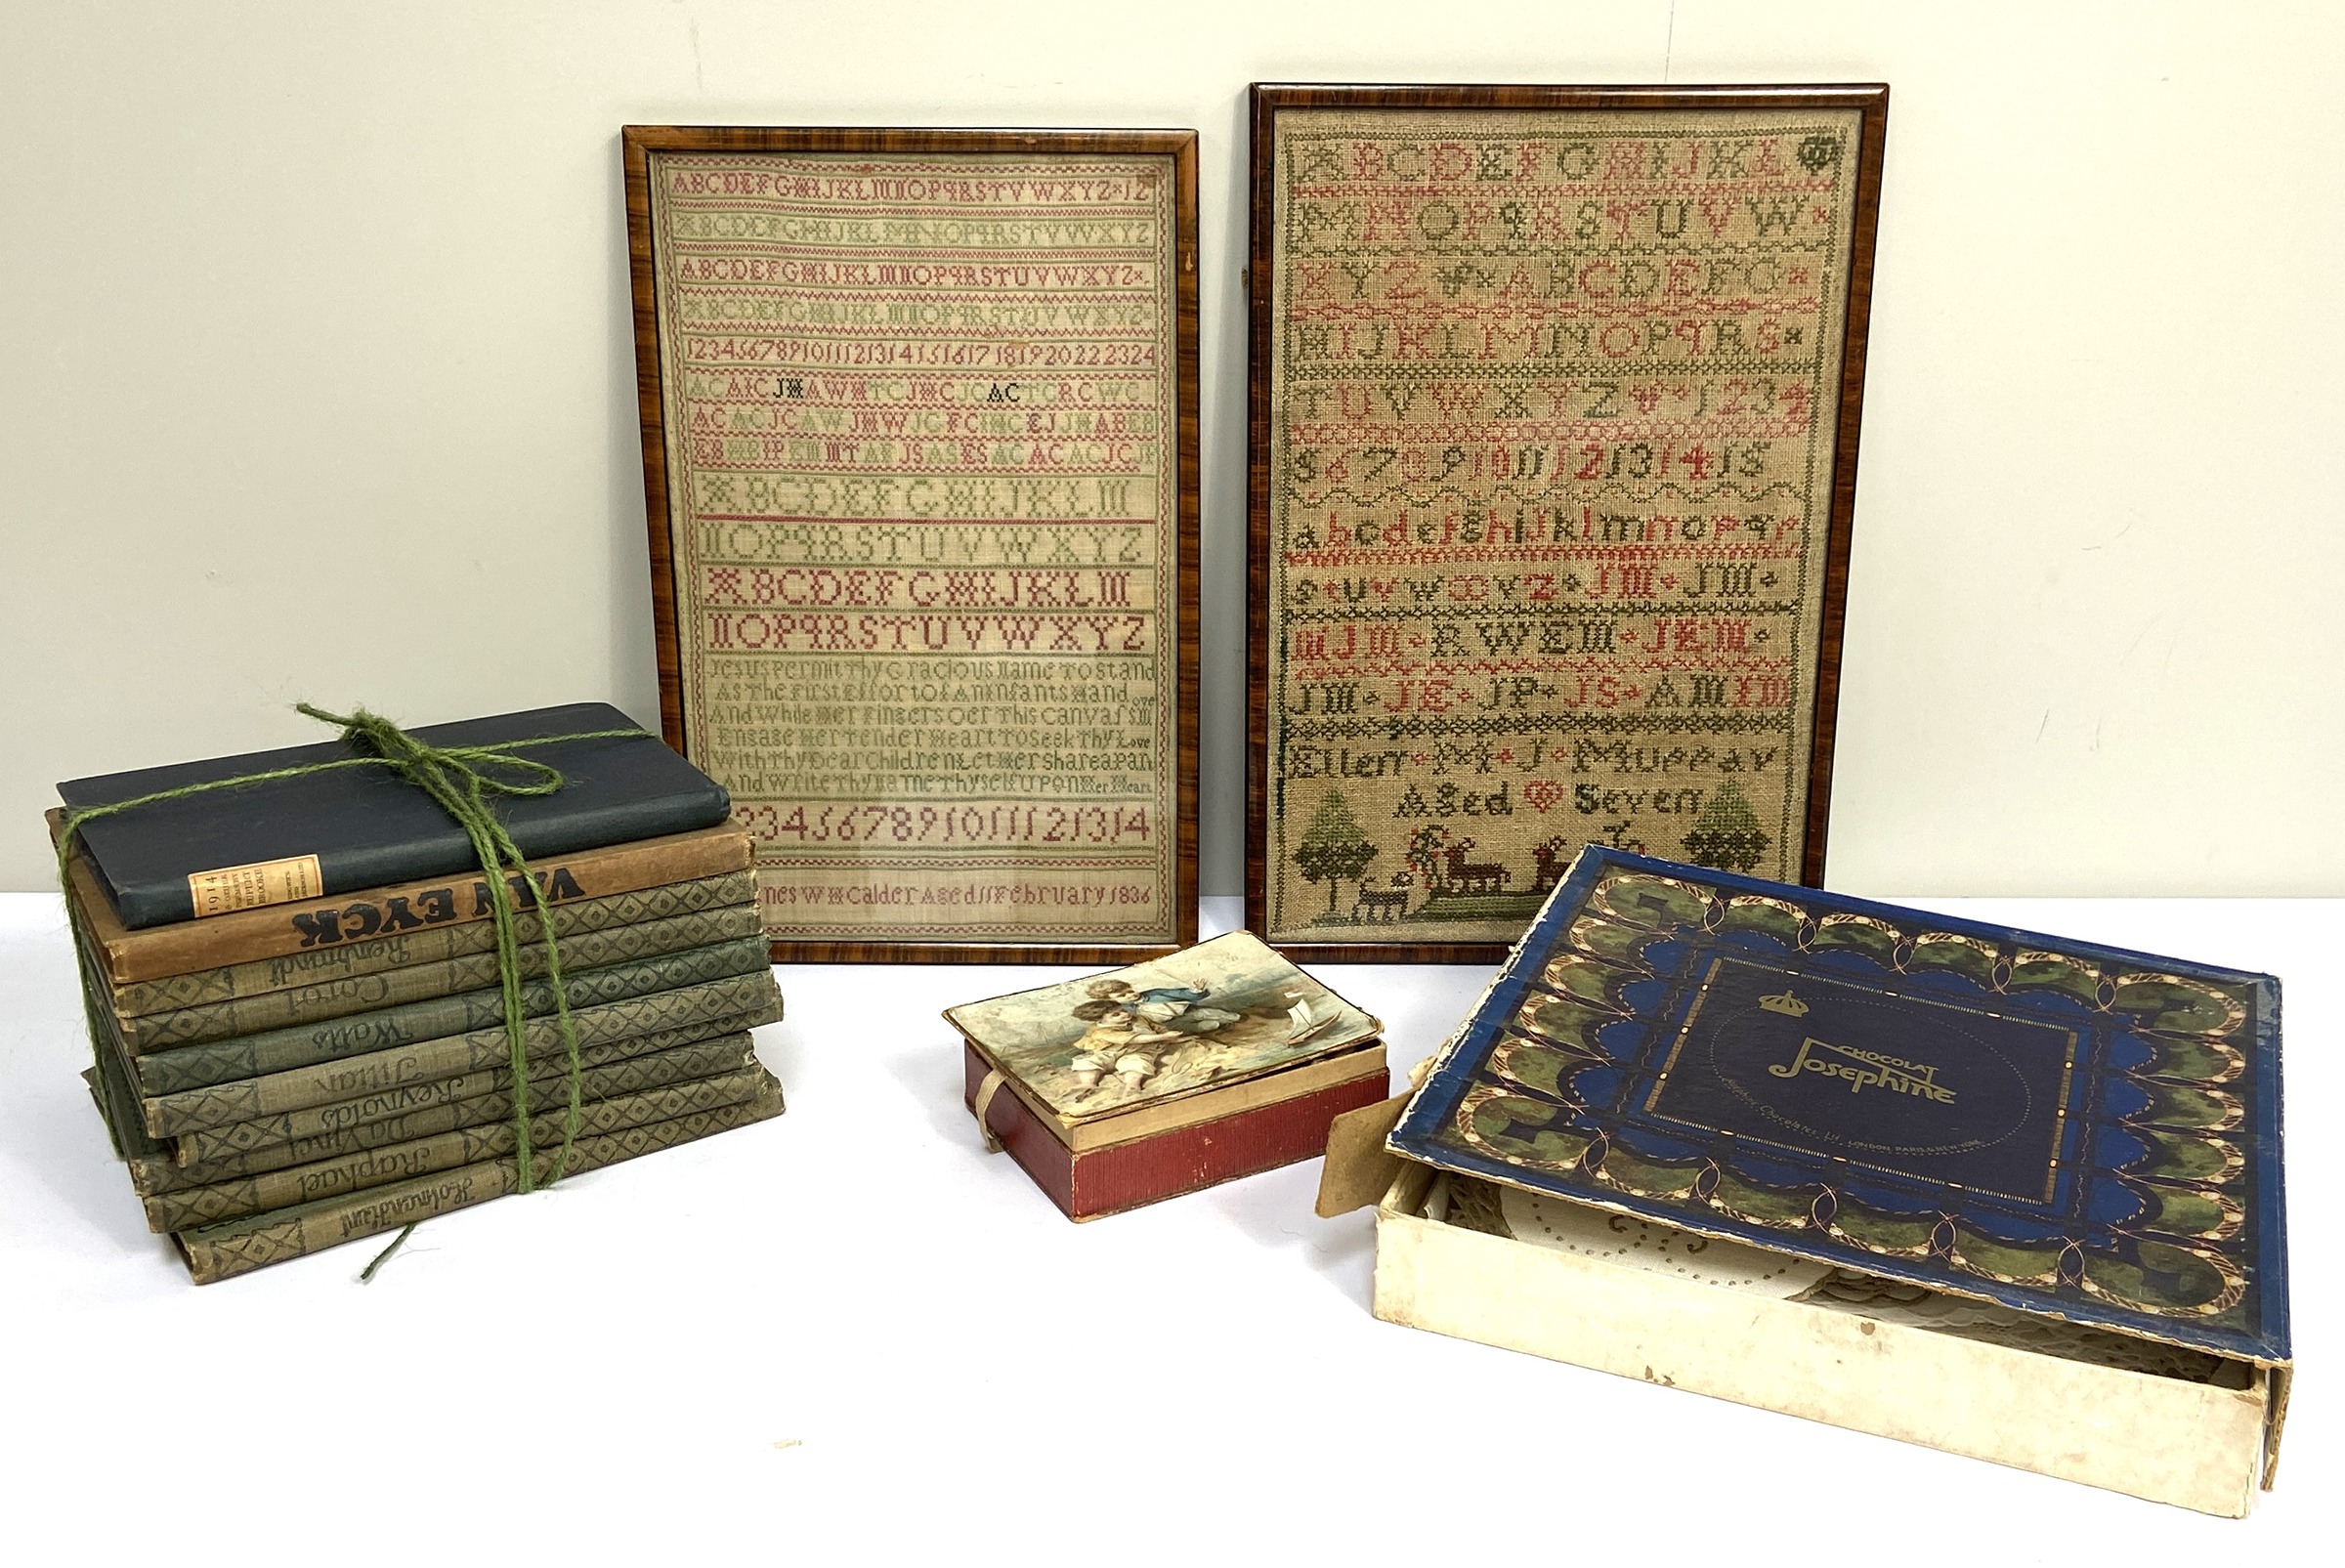 Two 19th century embroidered samplers, including one signed by Agnes W H Calder, Aged 11, February